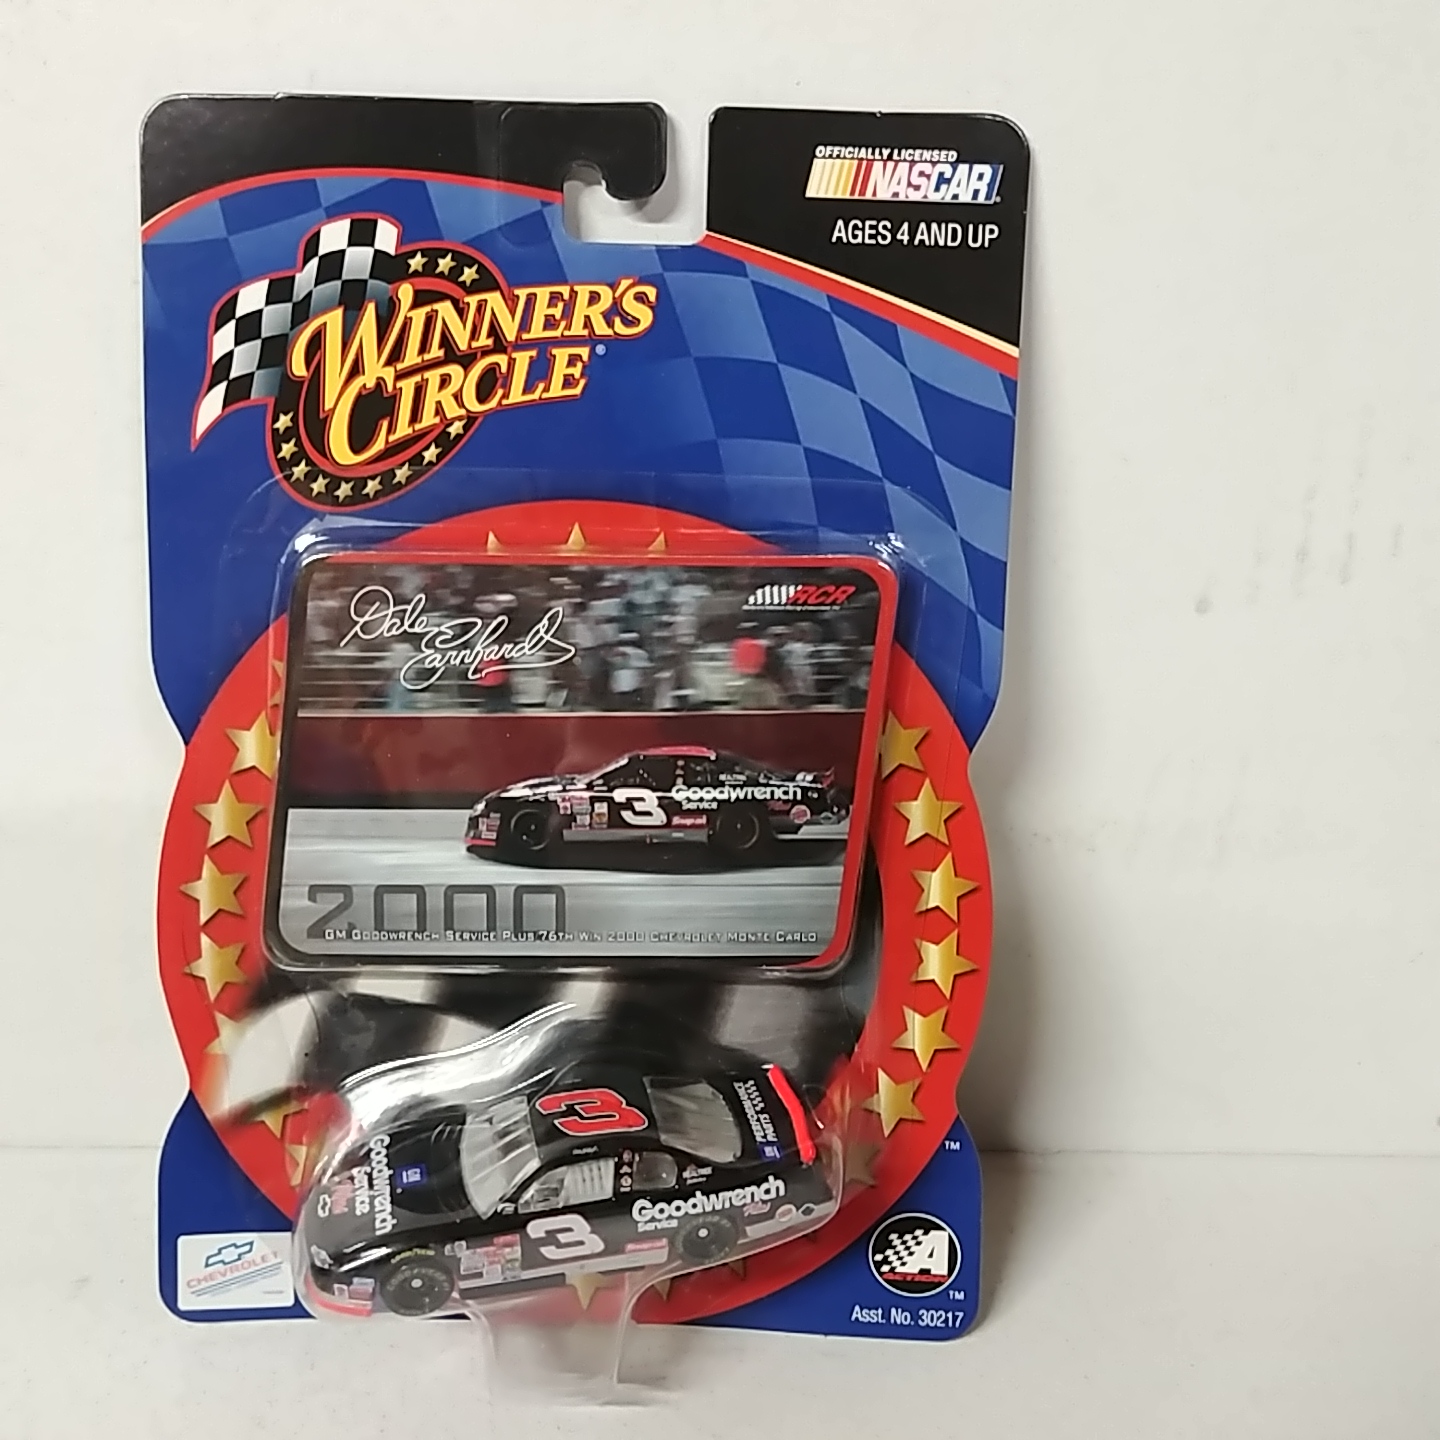 2000 Dale Earnhardt 1/64th Goodwrench "76th Win" car